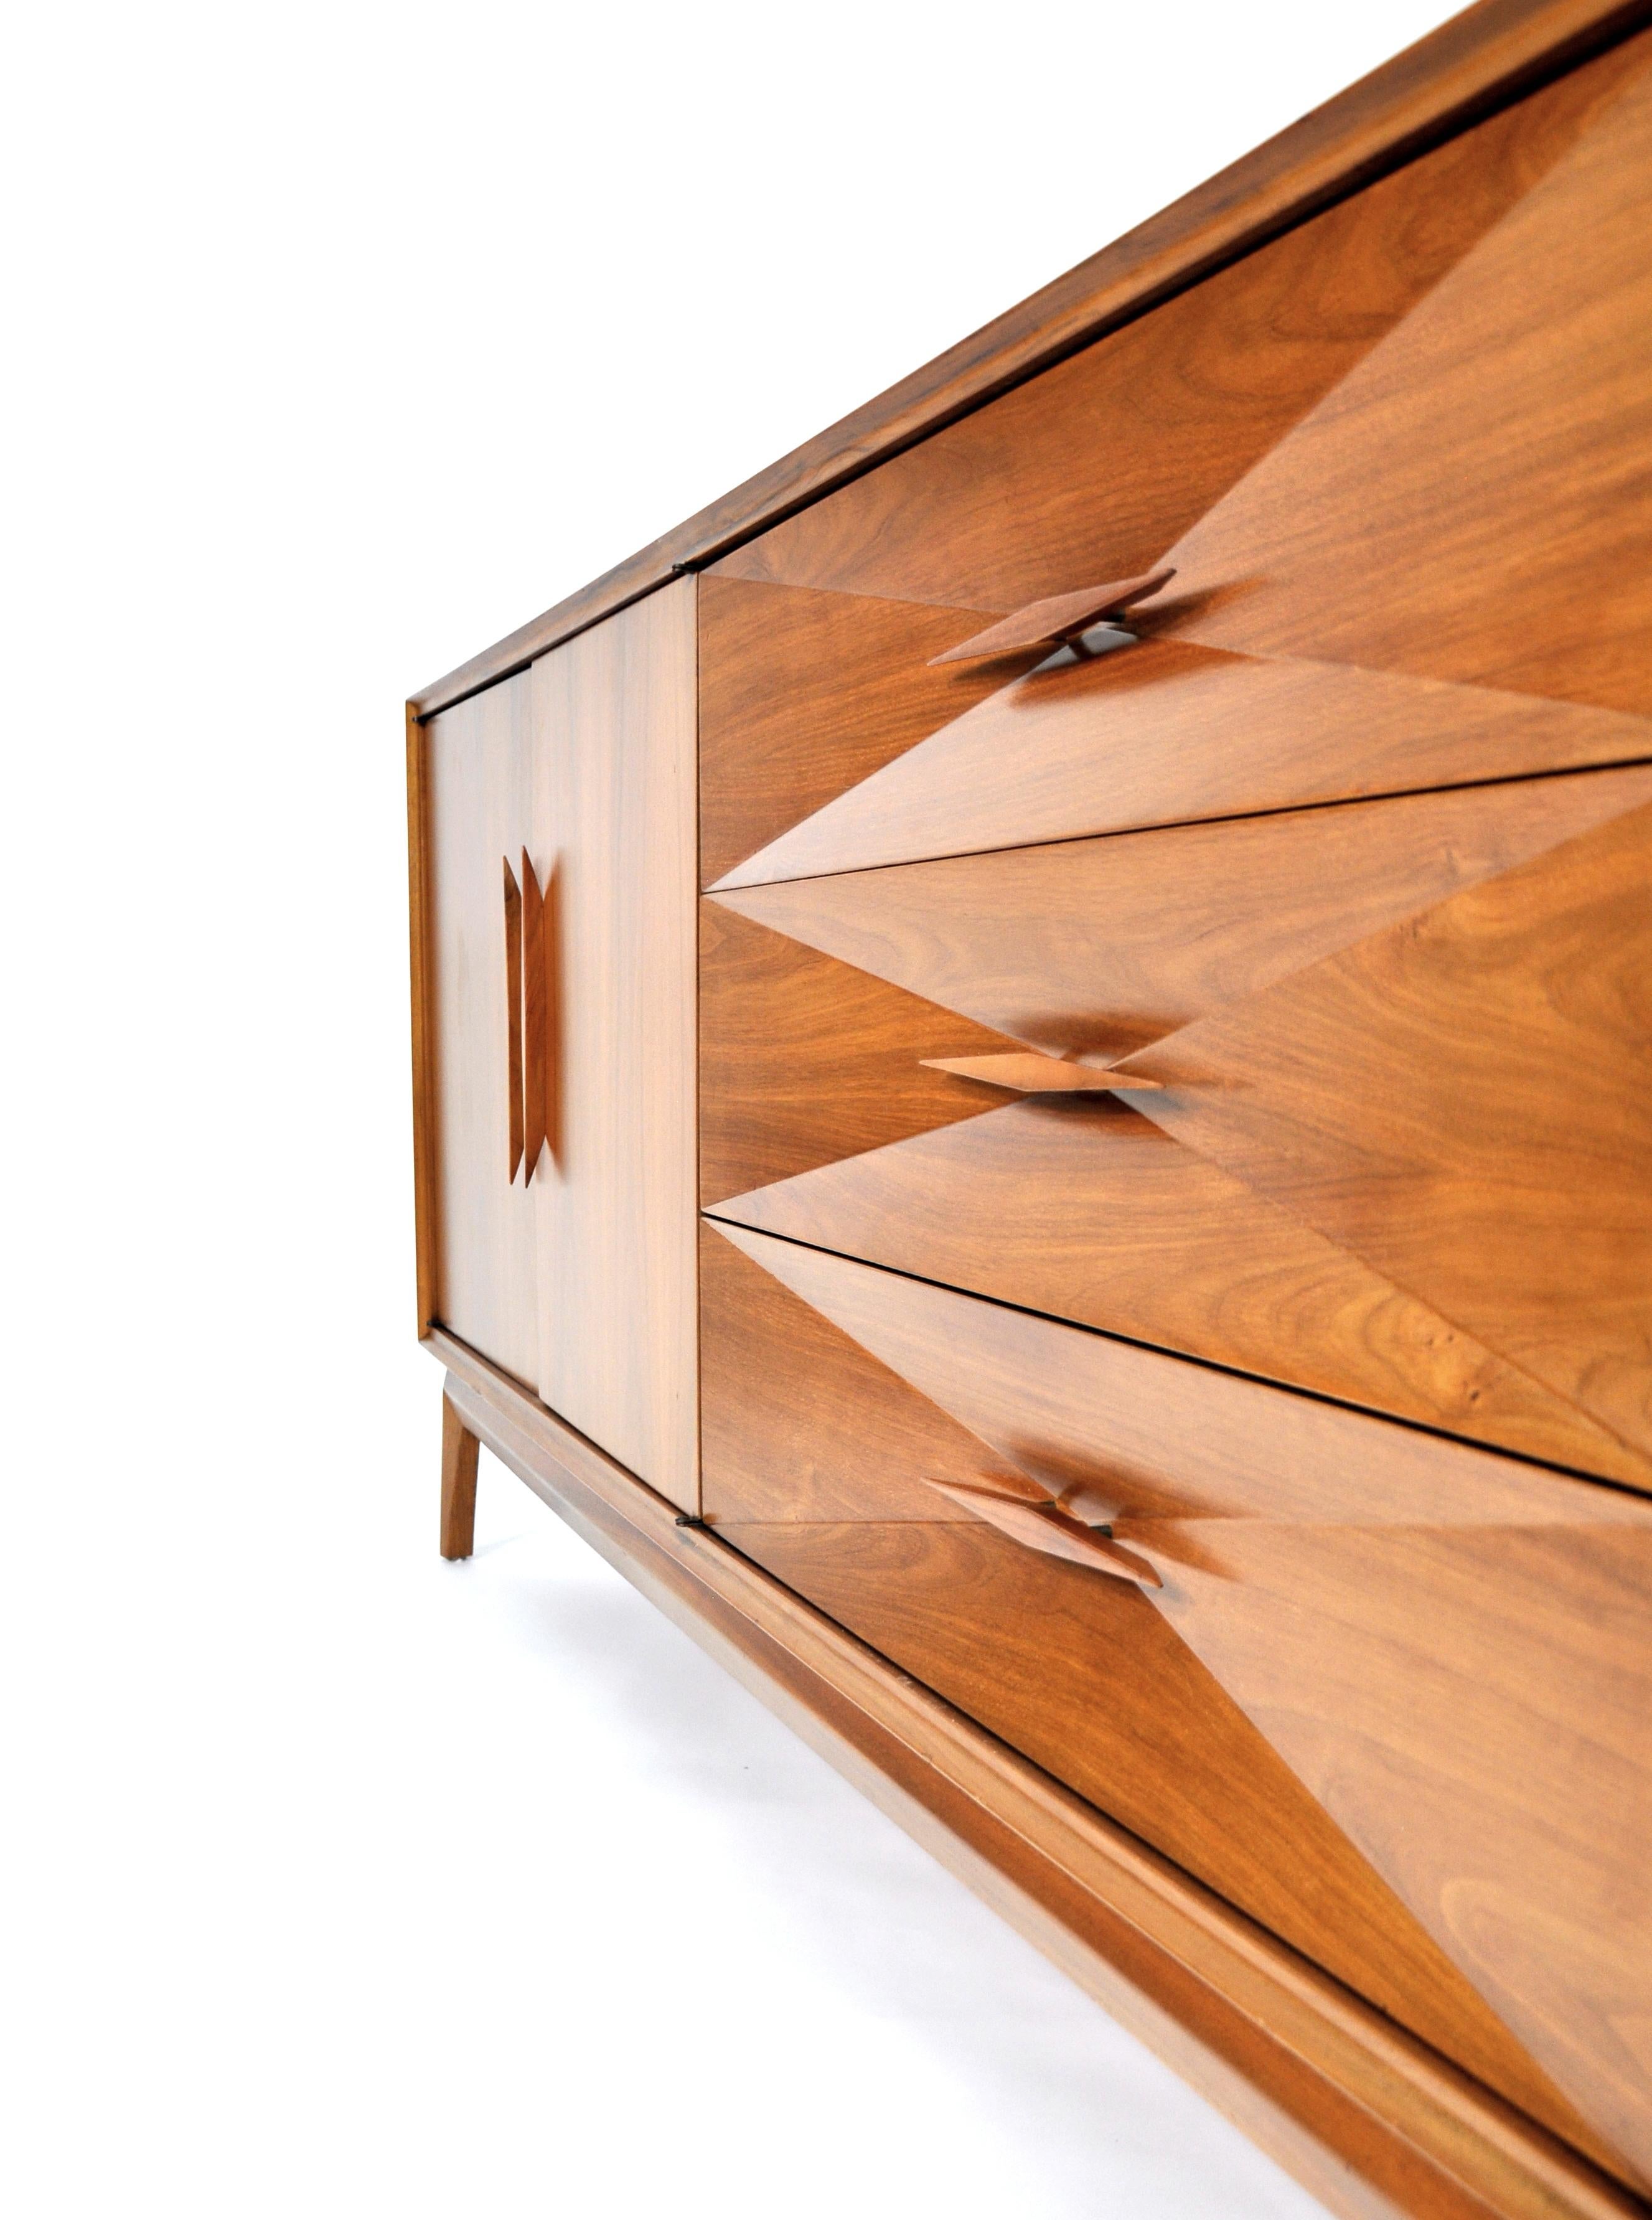 A superb Mid-Century Modern walnut credenza by Albert Parvin. Freshly restored and ready for your home or office, the sculptural dresser provides ample storage space. The drawer fronts have a striking concave diamond Front Design and signature